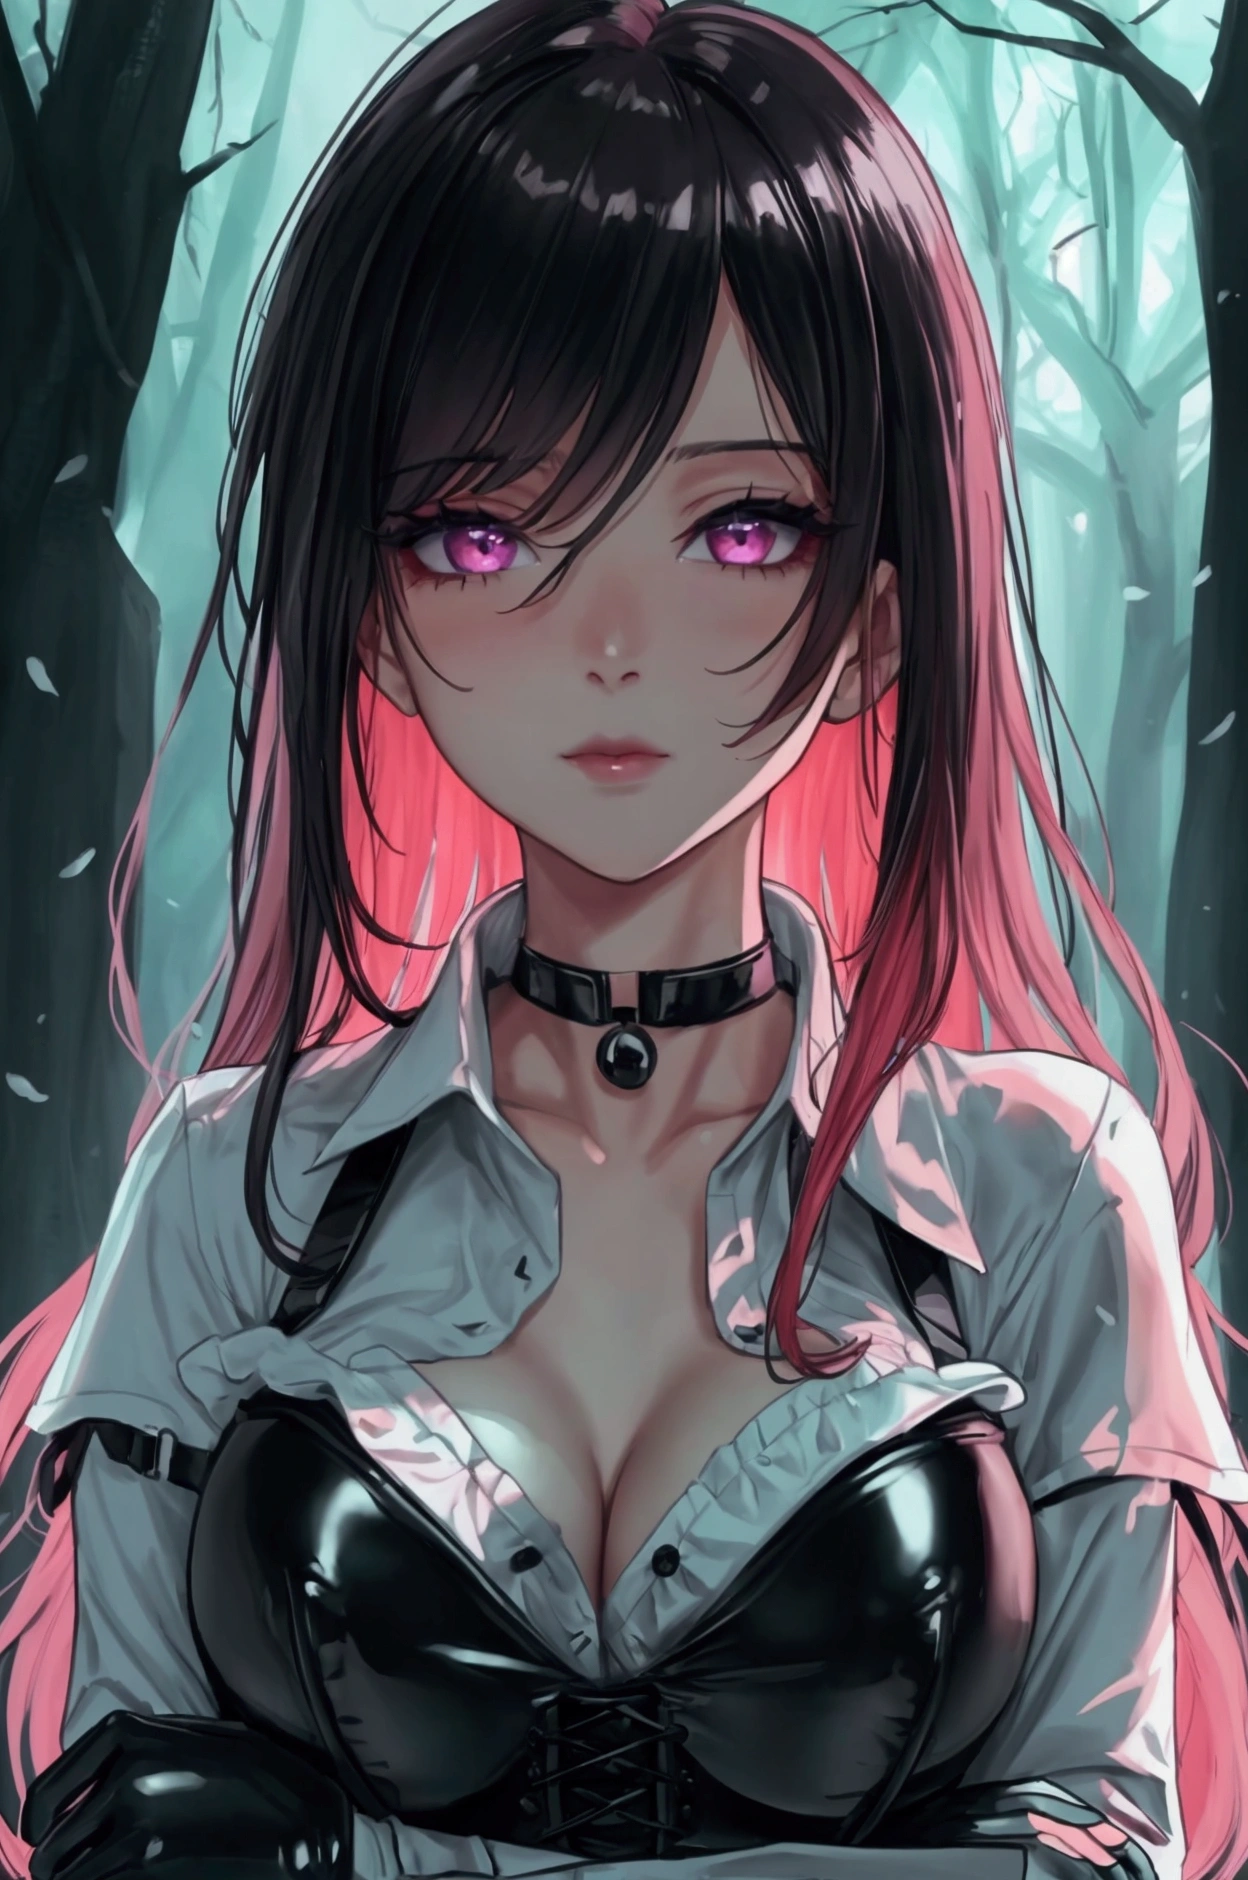 Masterpiece, Beautiful art, professional artist, 8k, Very detailed face, Detailed clothing, detailed fabric, 1 girl, View from the front, standing, crossed arms, pose sexy, BIG BREASTS, perfectly drawn body, shy expression, pale skin, beautiful face, long black hair, 4k eyes, very detailed eyes, pink cheeks, choker:1.6, (white long sleeve button down shirt with white collar), black gloves, gloves that cover hands, (black leather corset), (shiny black leggings), Sensual Lips, show details in the eyes, dark forest, Atmosphere, fog, At night